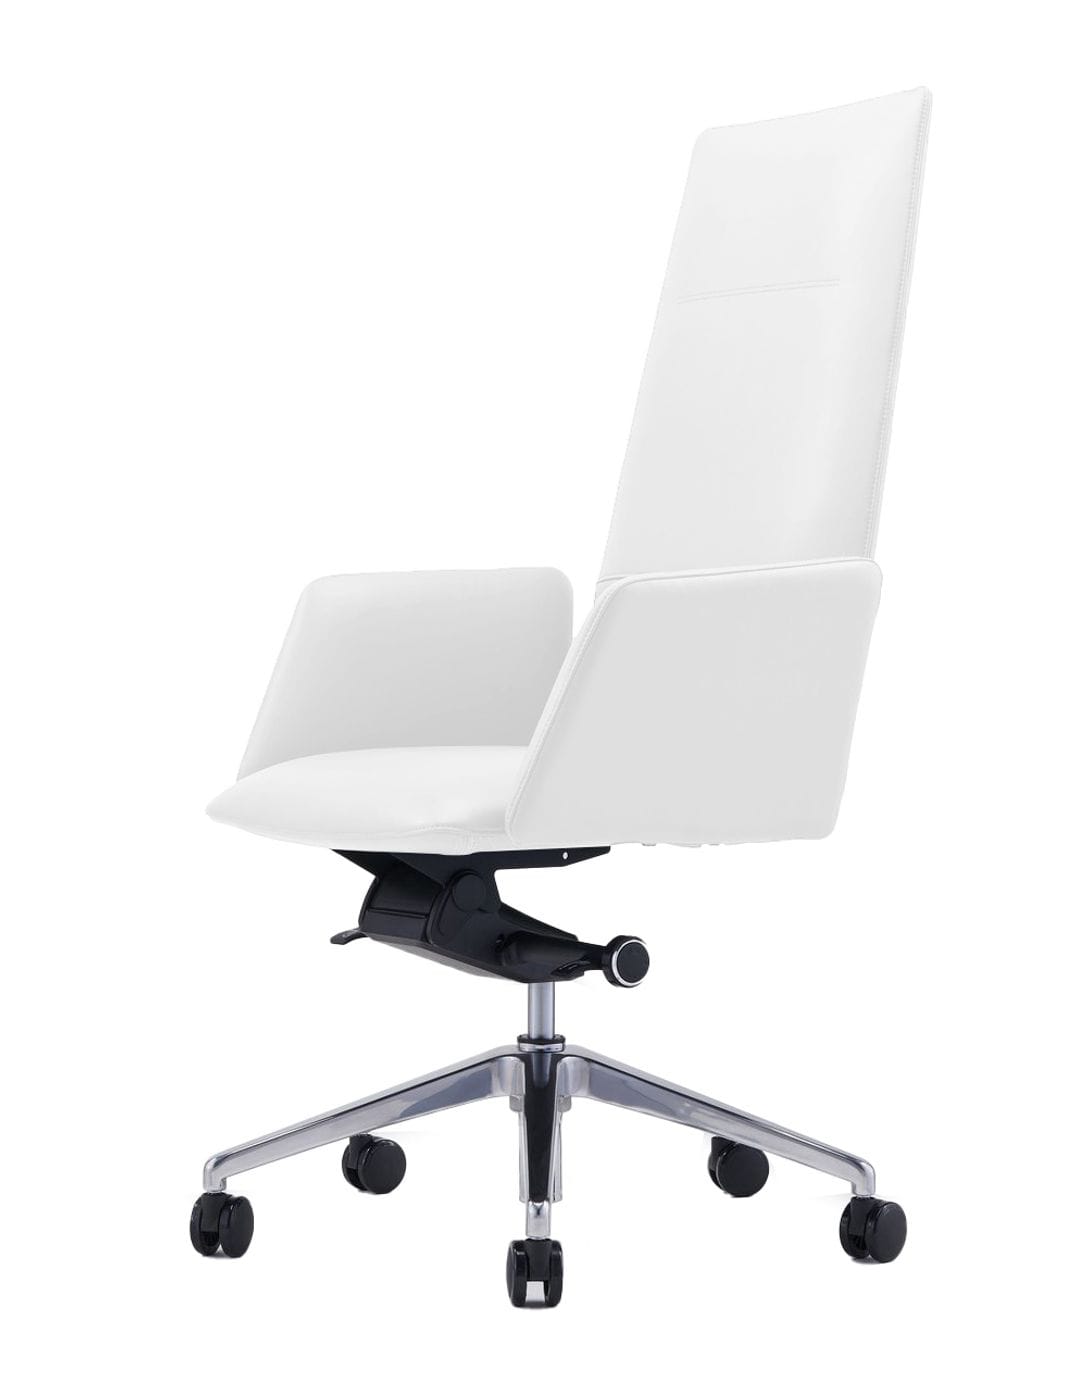 Modrest Tricia White High Back Executive Office Chair | VIG Furniture